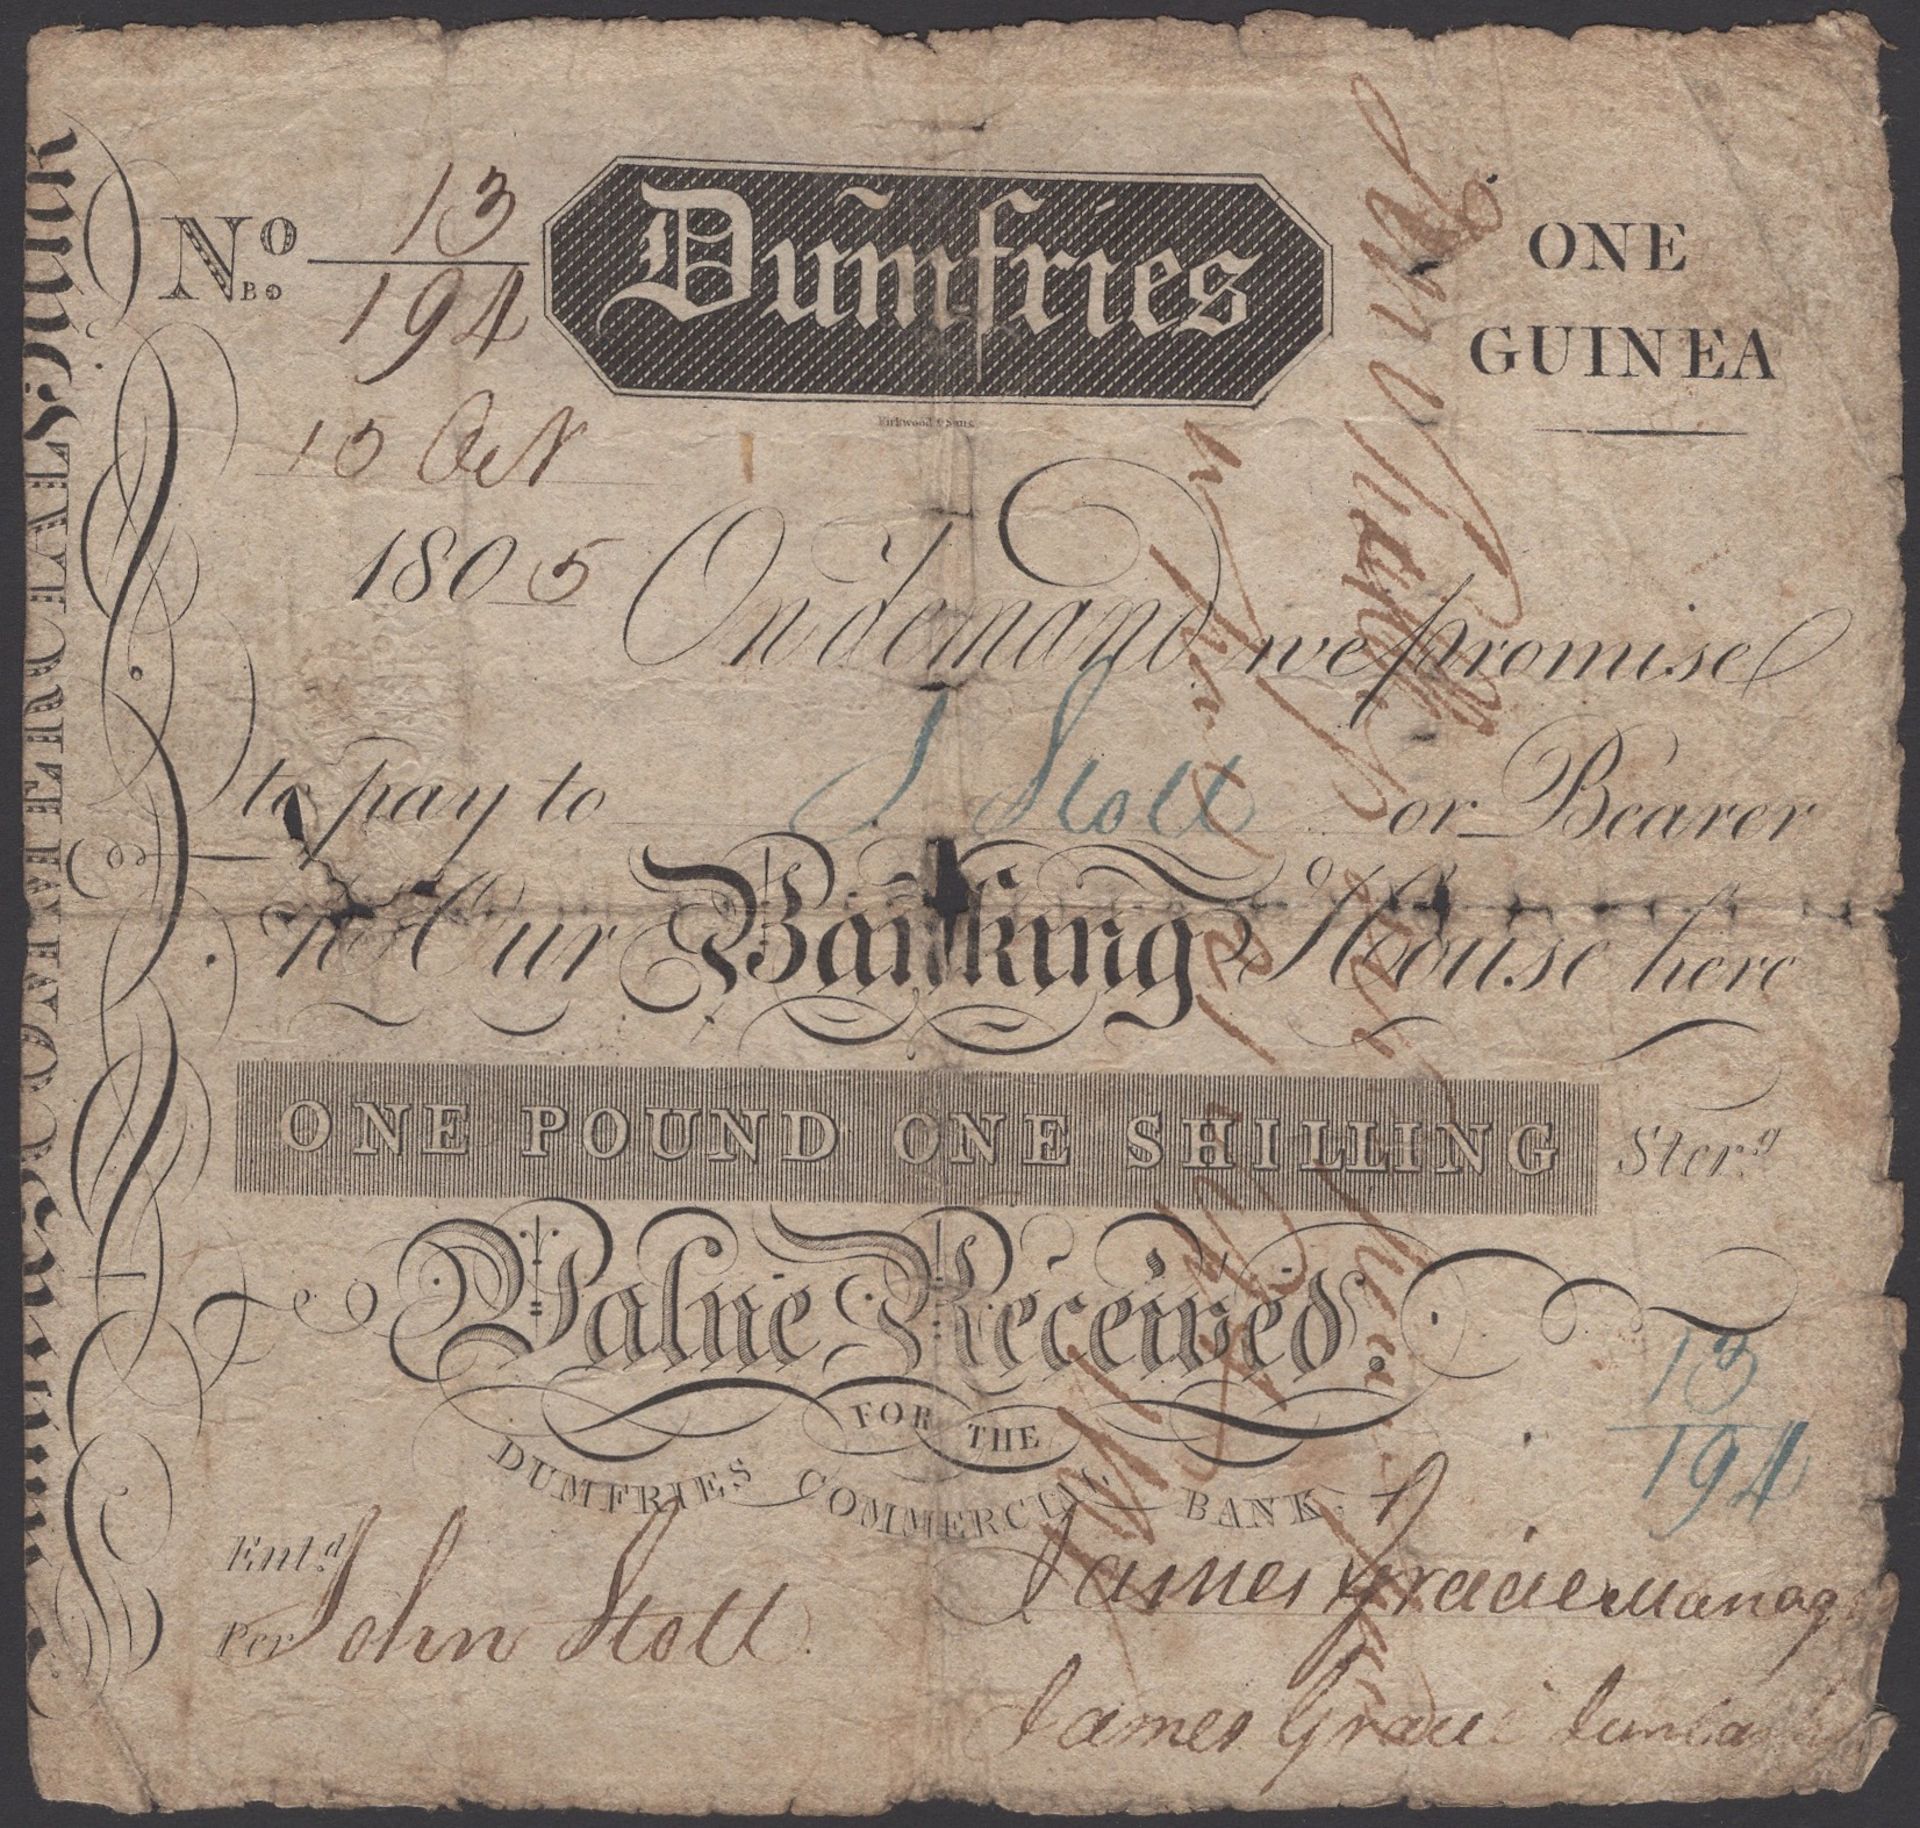 Dumfries Commercial Bank, 1 Guinea, 15 October 1805, serial number 13/194, very good and sca...